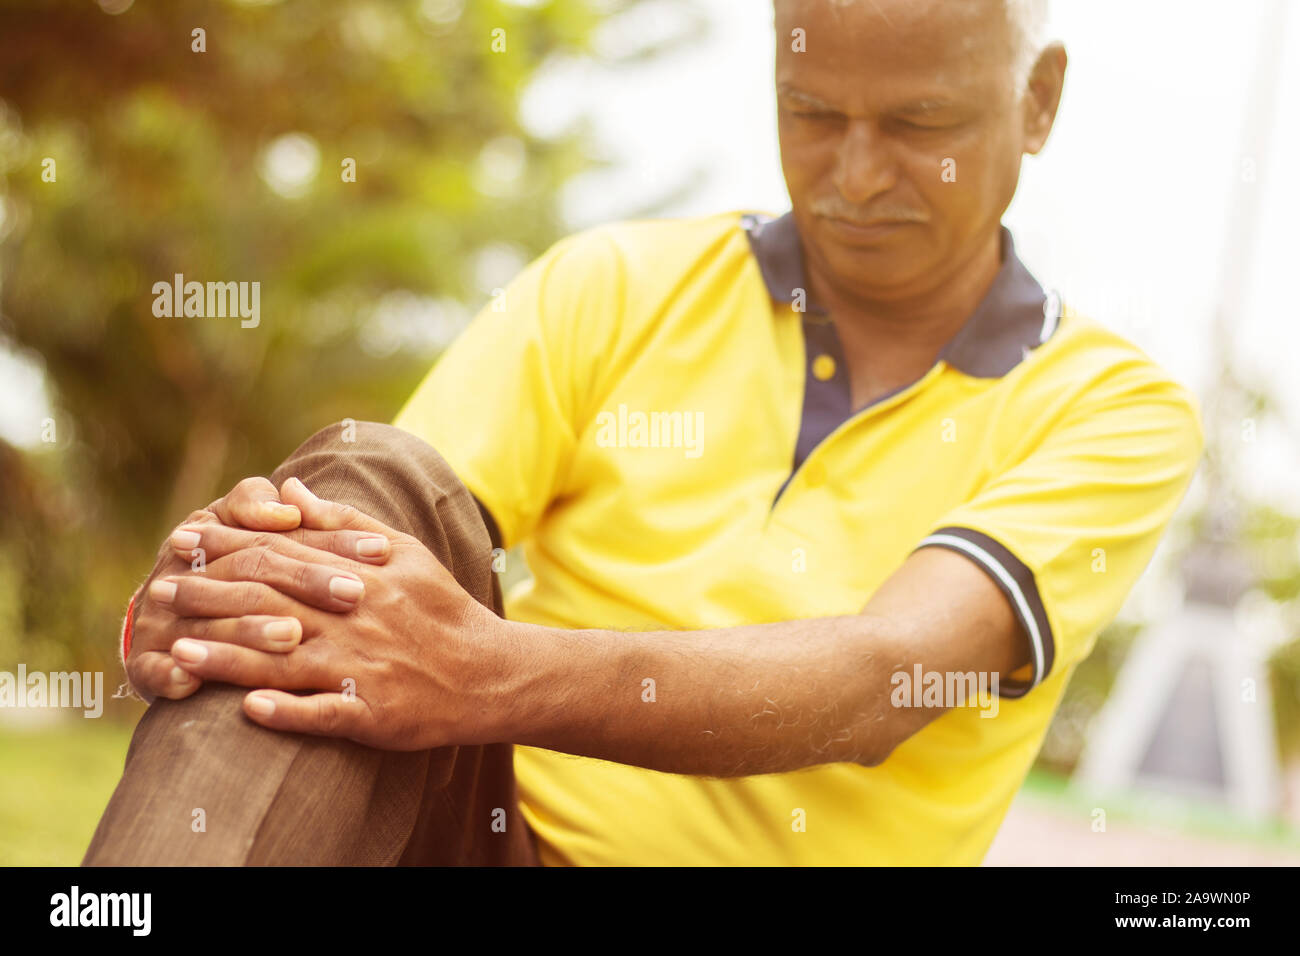 Elderly man having a knee injury - Concept Senior Man fitness and yoga at outdoor - Selective focucs on hand, old man holding knee due to pain. Stock Photo